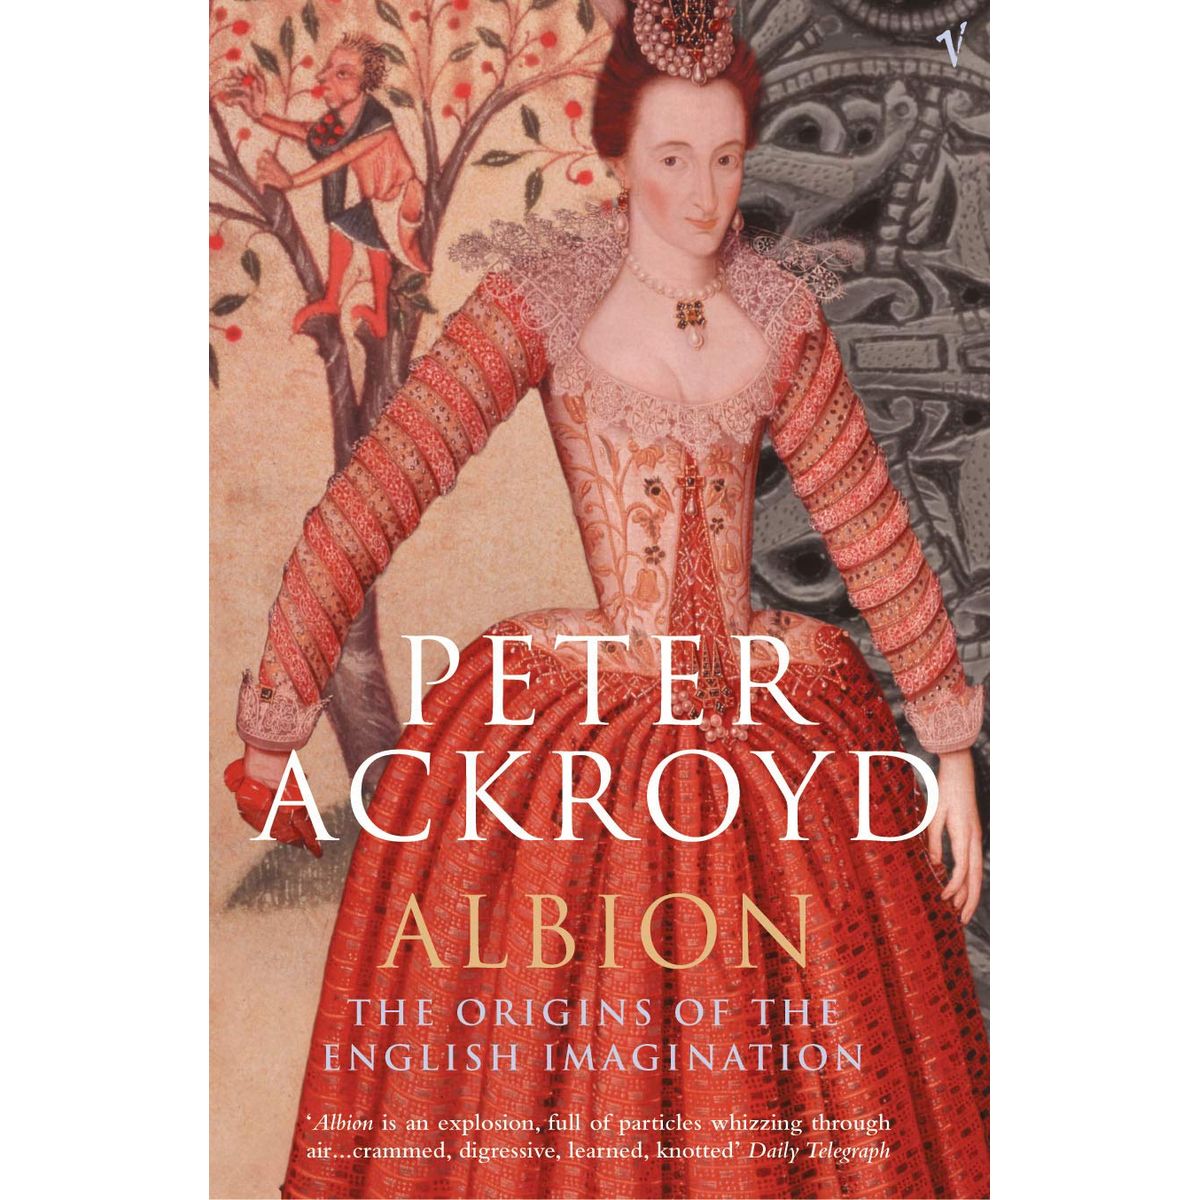 ISBN: 9780385497725 / 0385497725 - Albion: The Origins of the English Imagination by Peter Ackroyd [2002]